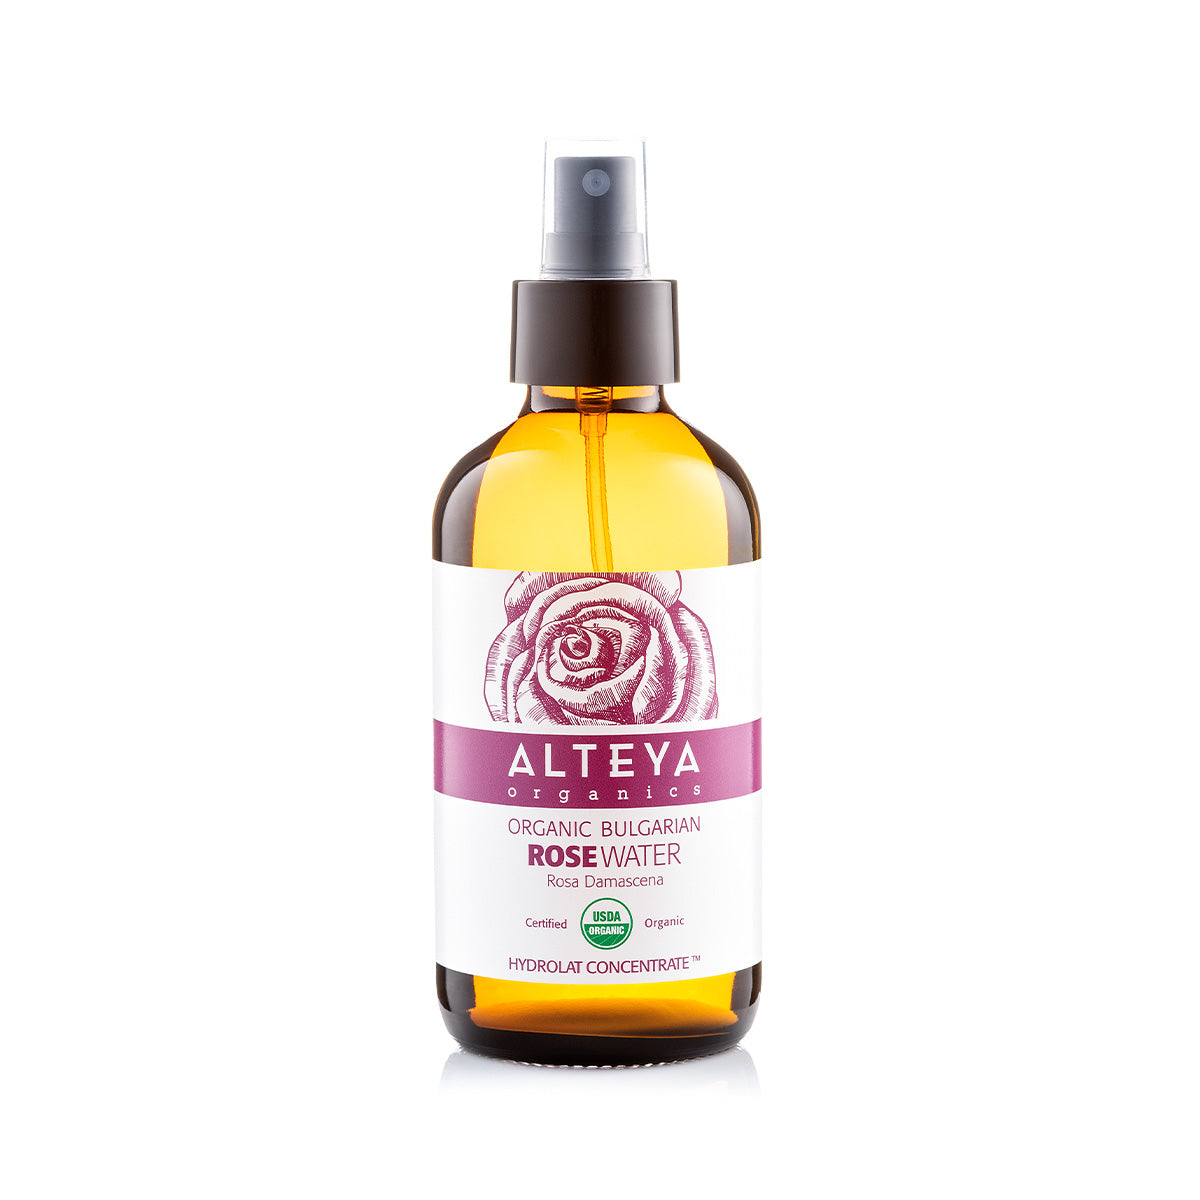 An Alteya Organics Bulgarian Organic Rose Water – Glass Spray bottle on a white background, perfect for hydrating skincare.